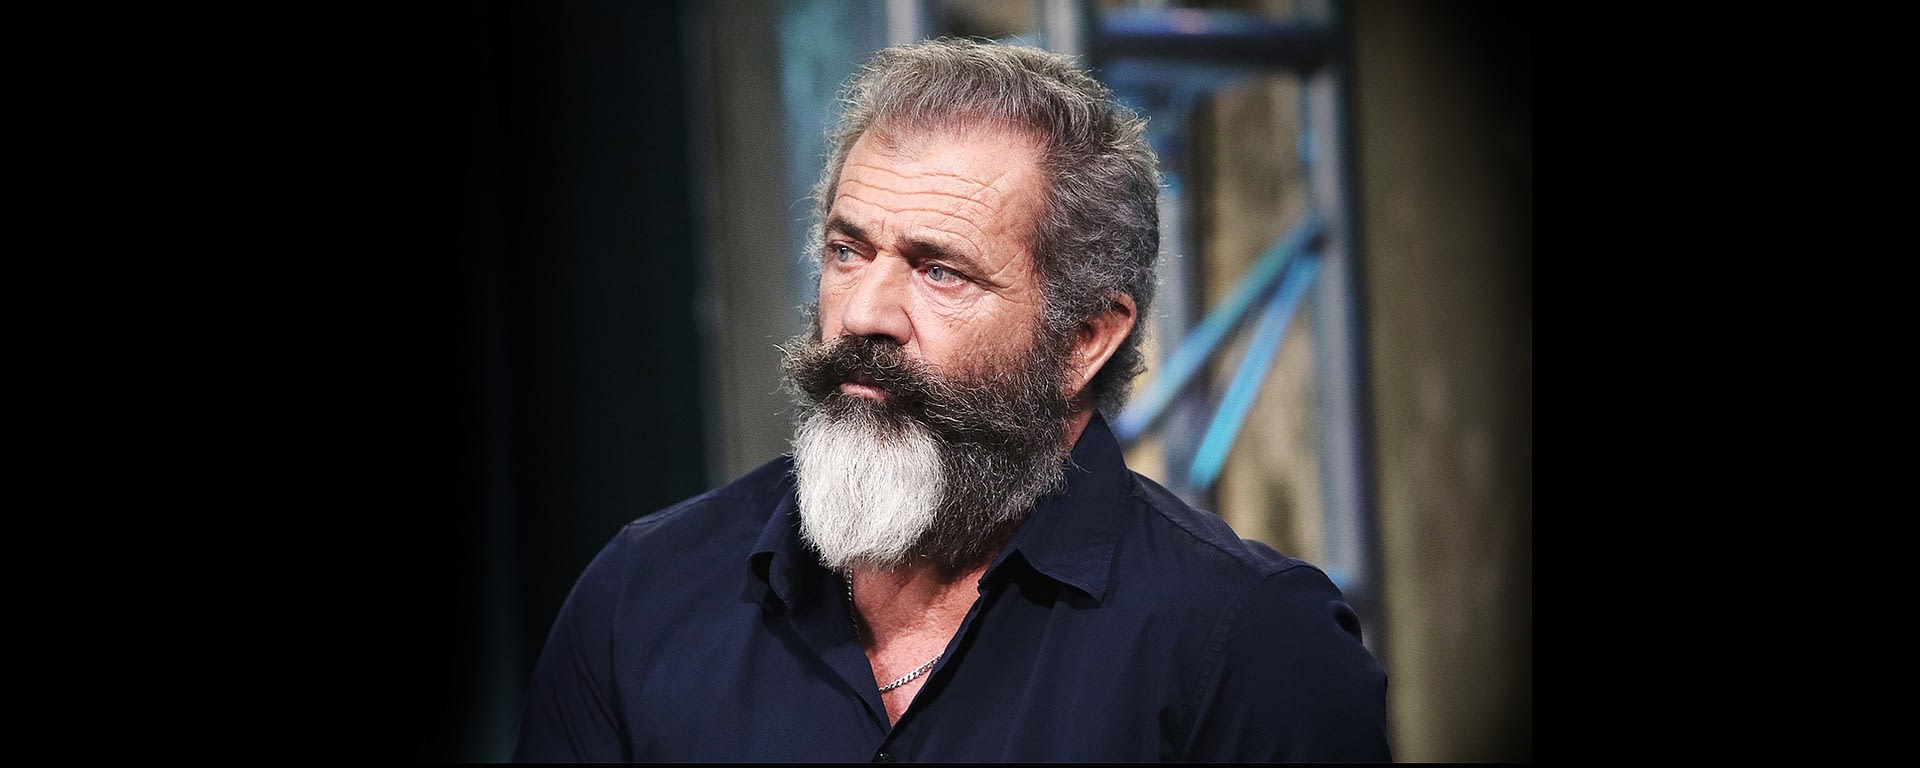 Mel Gibson is Coming to JRE This Week